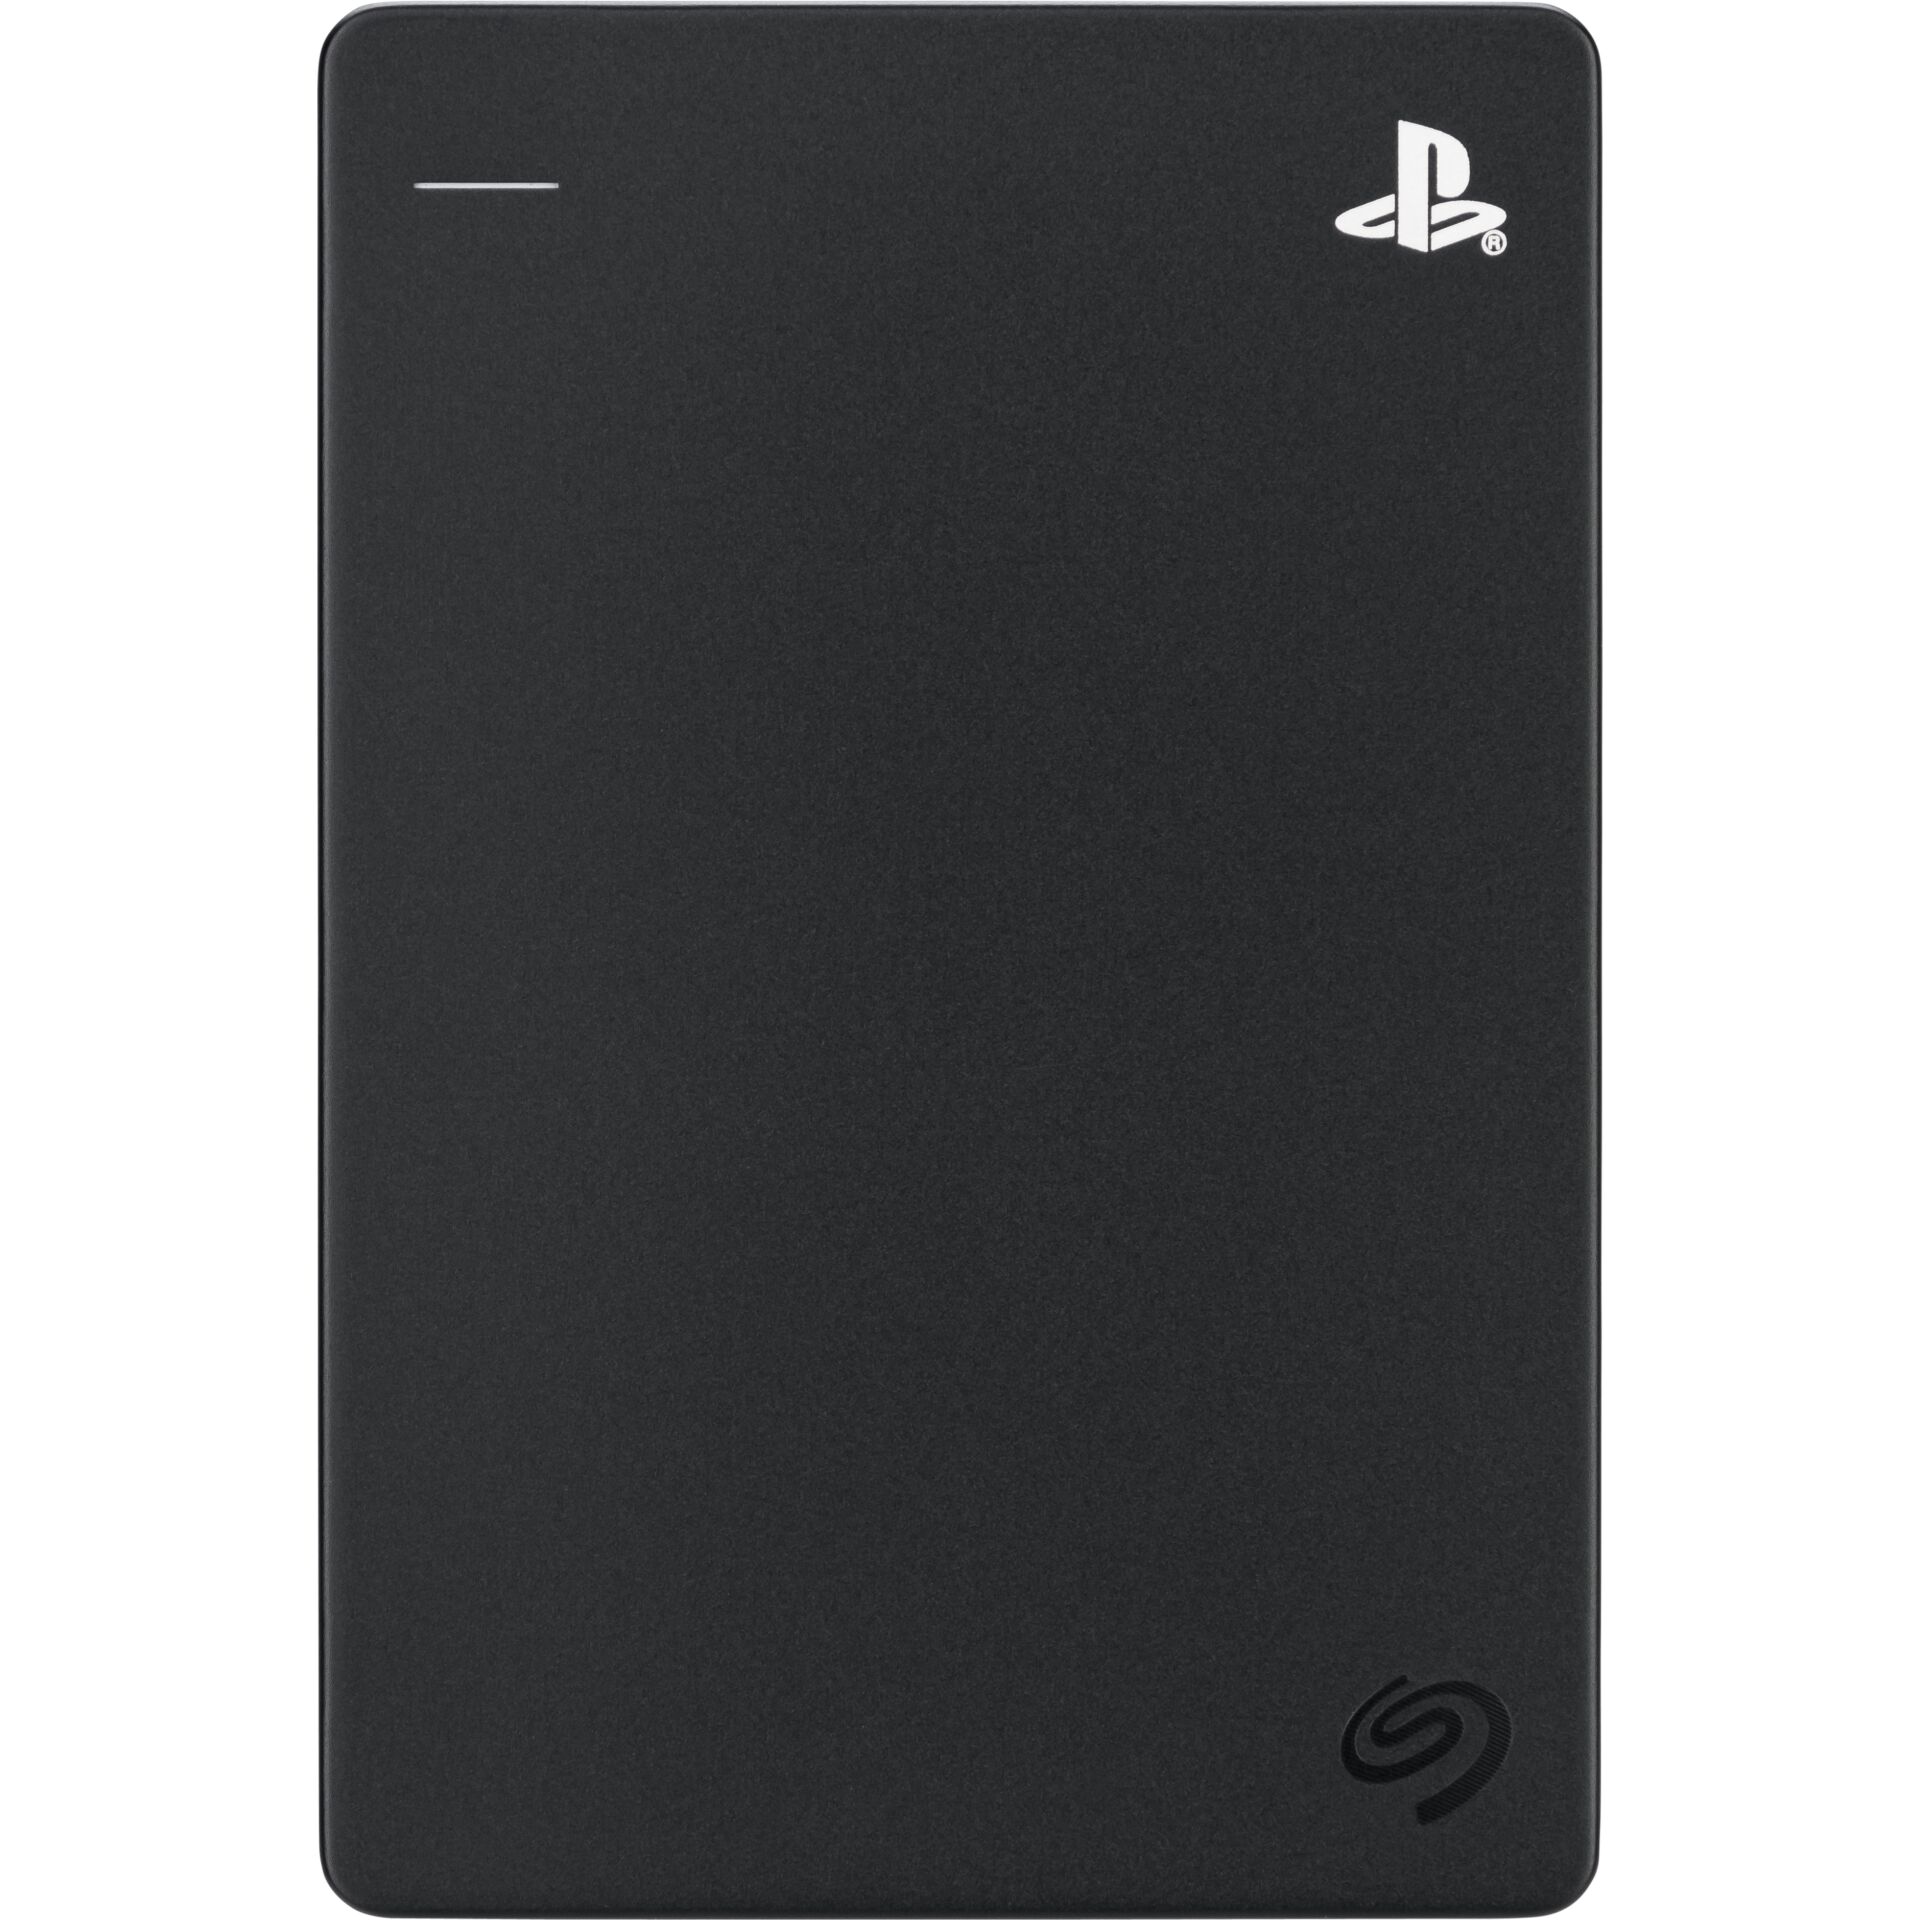 4.0 TB SSD Seagate Game Drive for PlayStation schwarz, SATA 6Gb/s